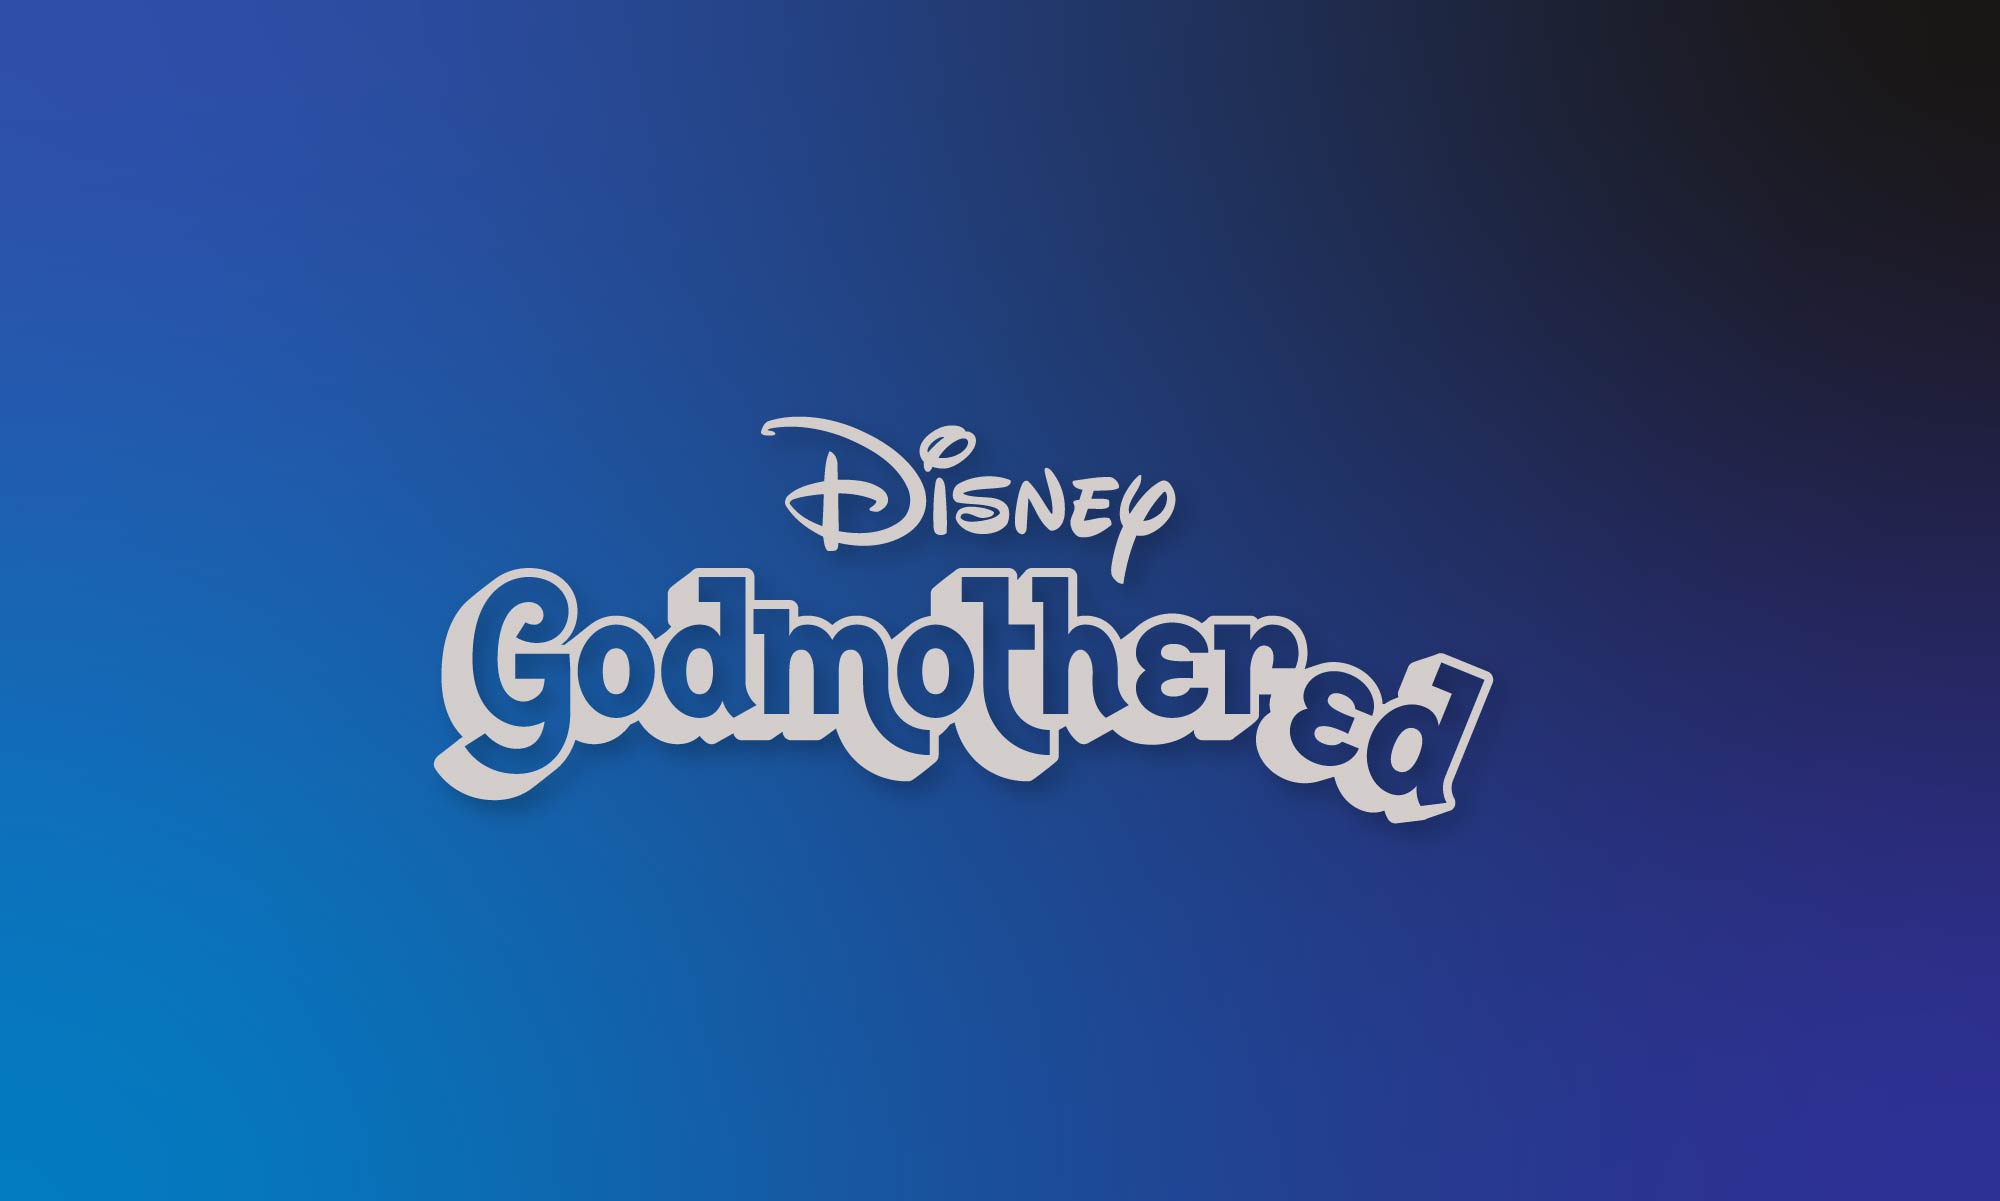 Godmothered Disney Title Treatment by Hoodzpah featuring 3d lettering